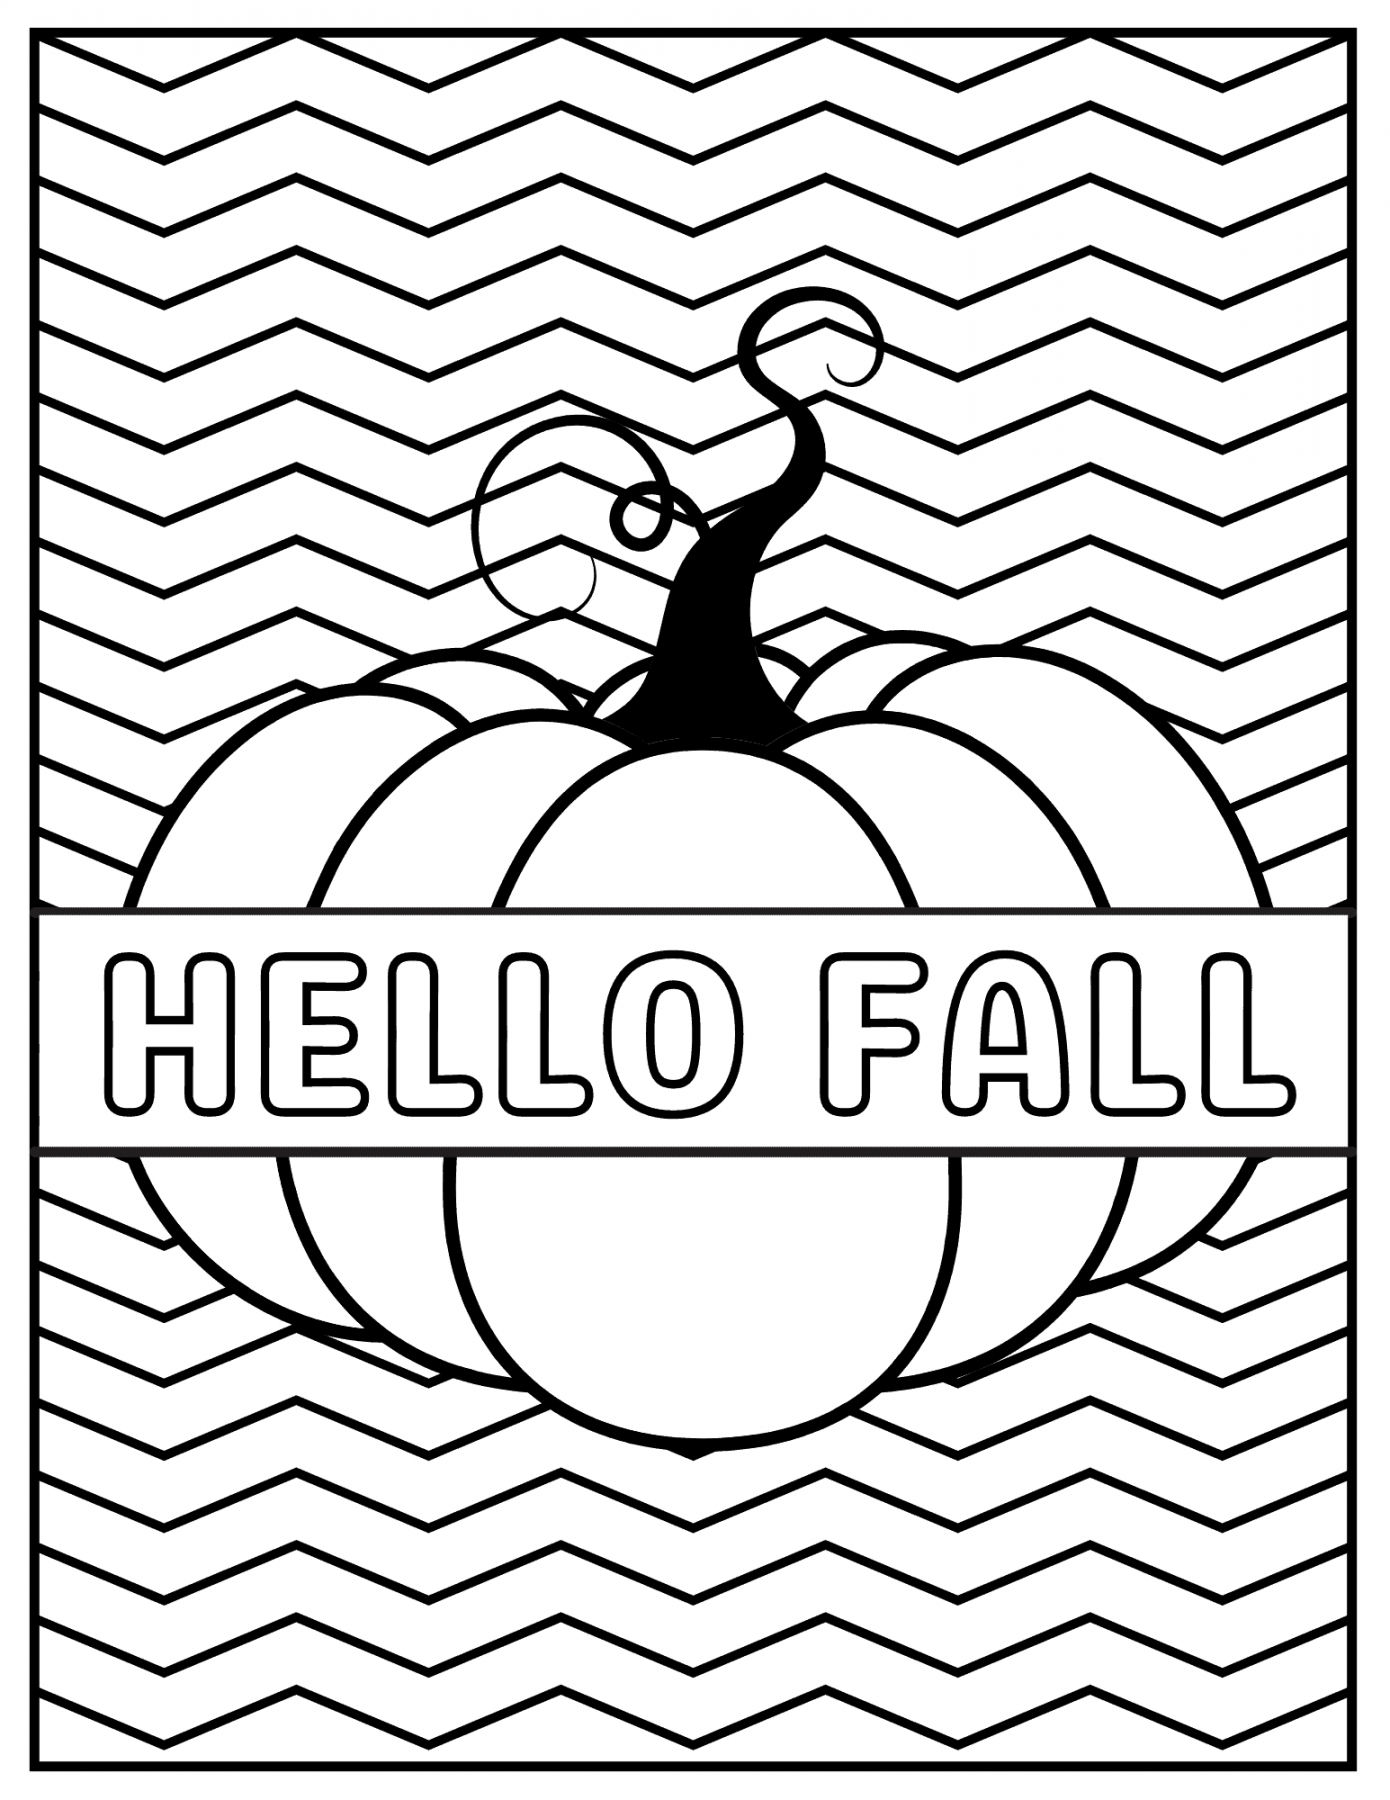 Free Fall Coloring Pages Printable - Printable -  Free Printable Fall Coloring Pages - Prudent Penny Pincher